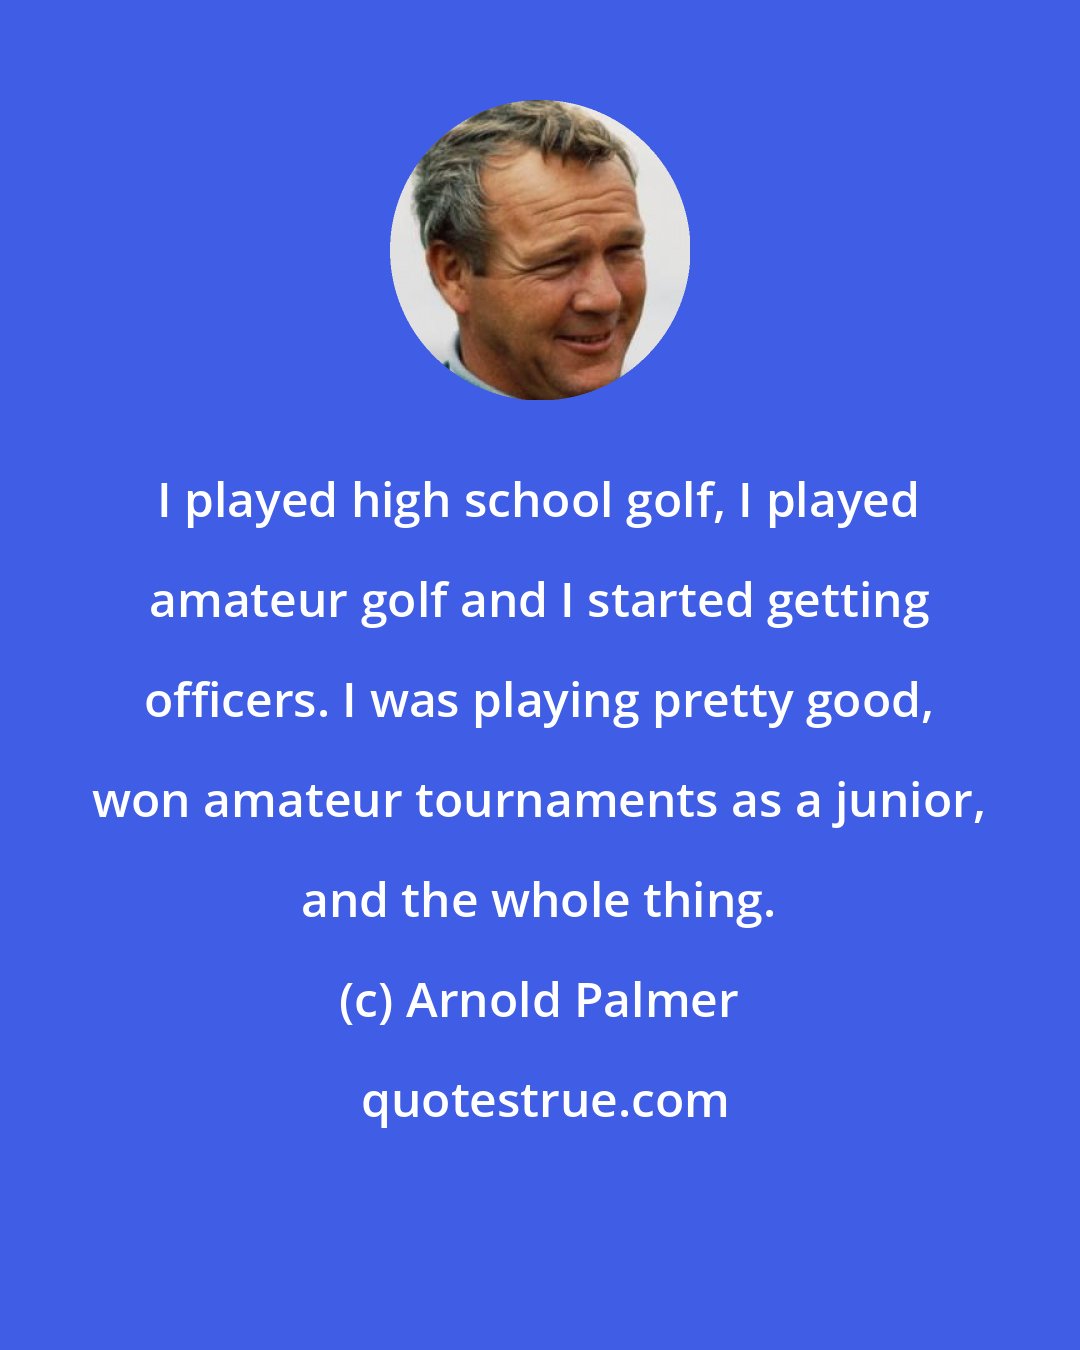 Arnold Palmer: I played high school golf, I played amateur golf and I started getting officers. I was playing pretty good, won amateur tournaments as a junior, and the whole thing.